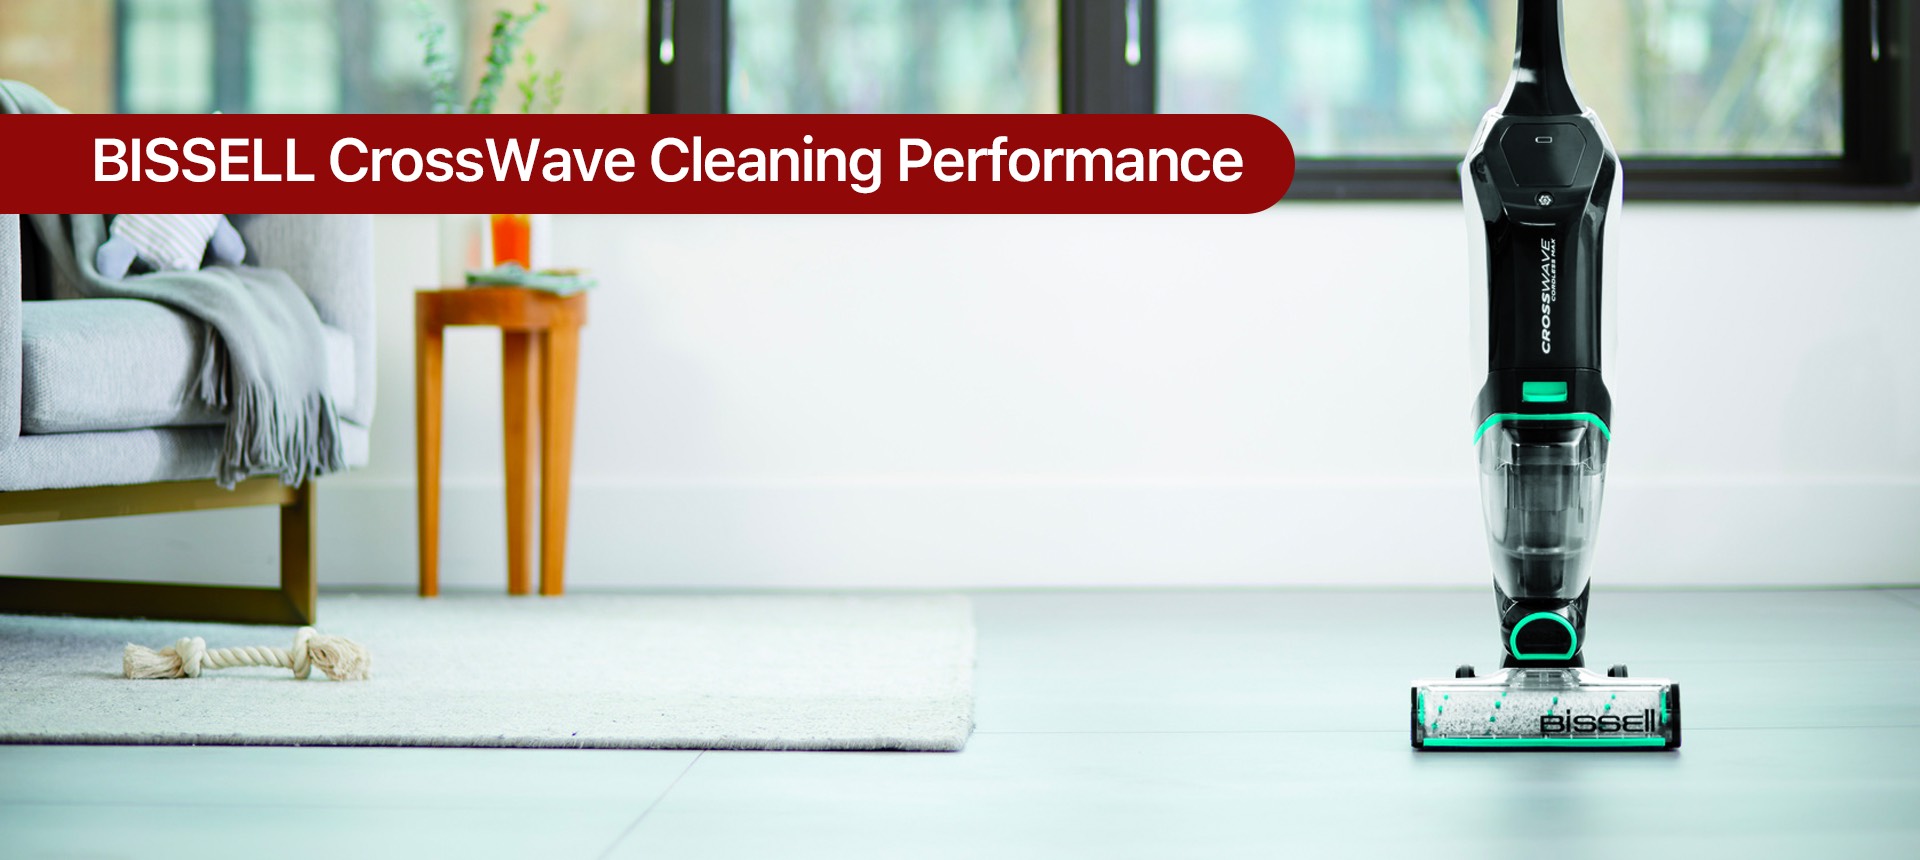 BISSELL CrossWave Cleaning Performance